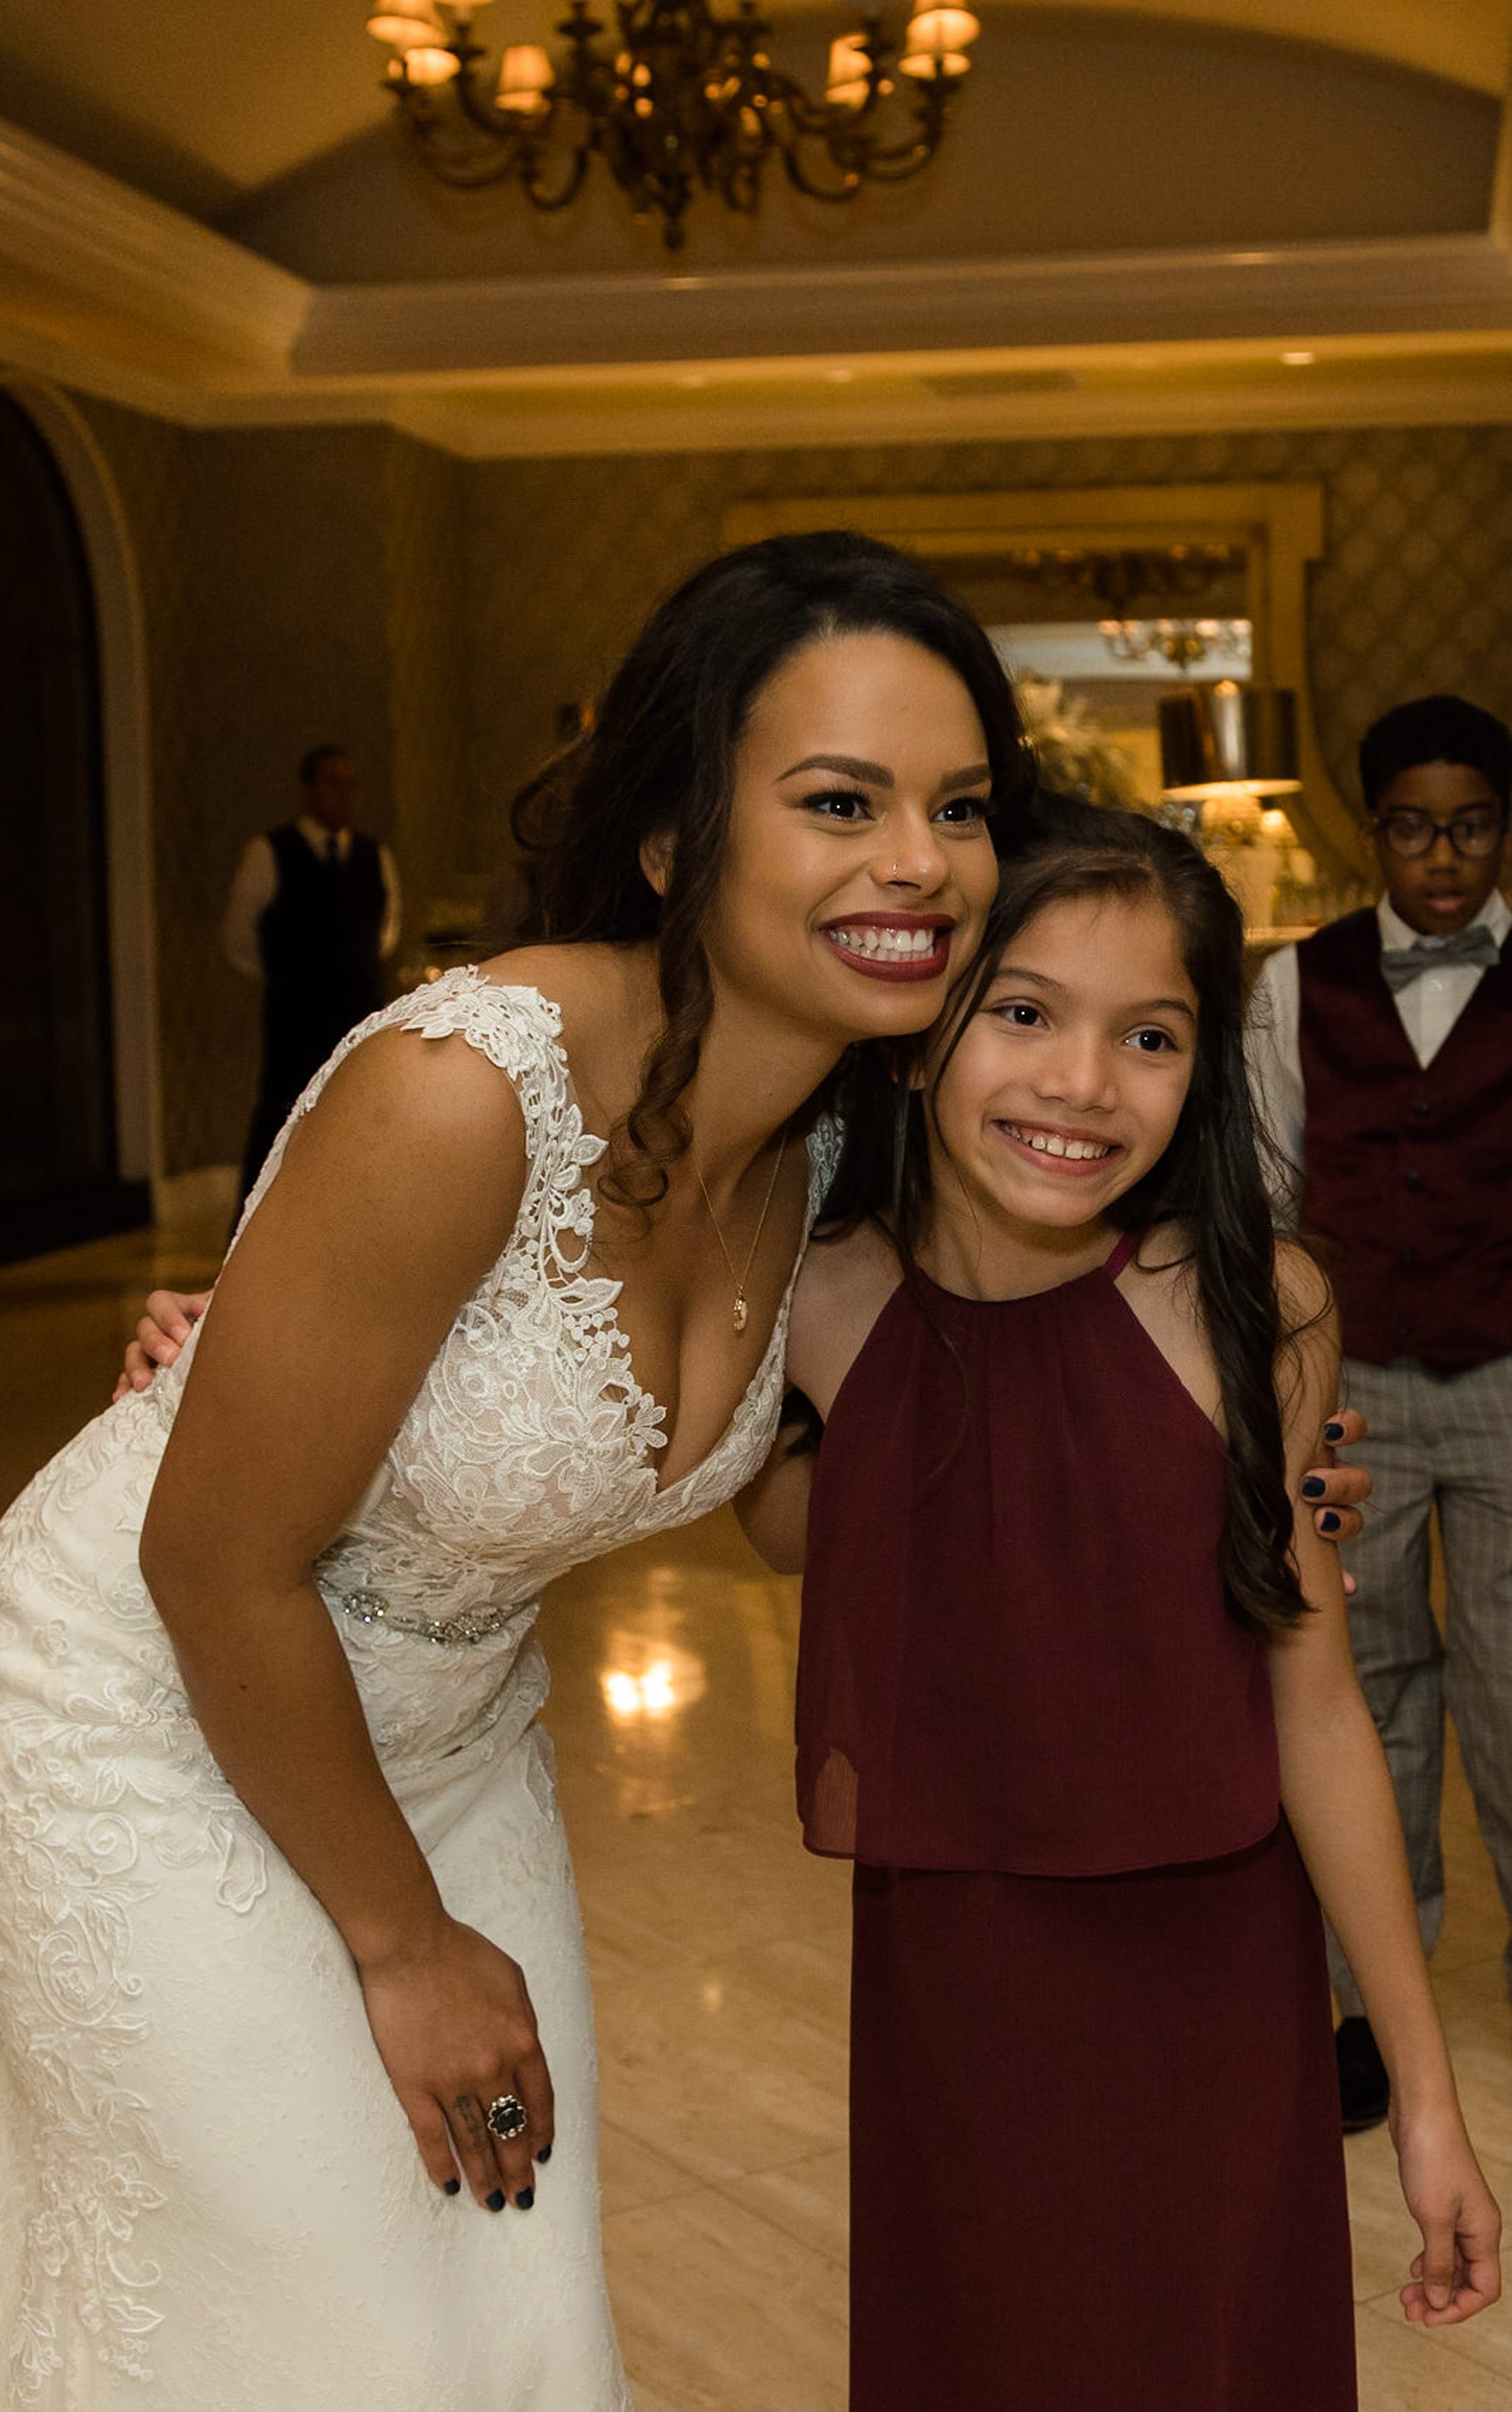  TX.

Monica Salazar is a Dallas, Darian and Holland's wedding at the Rosewood Mansion in Dallas